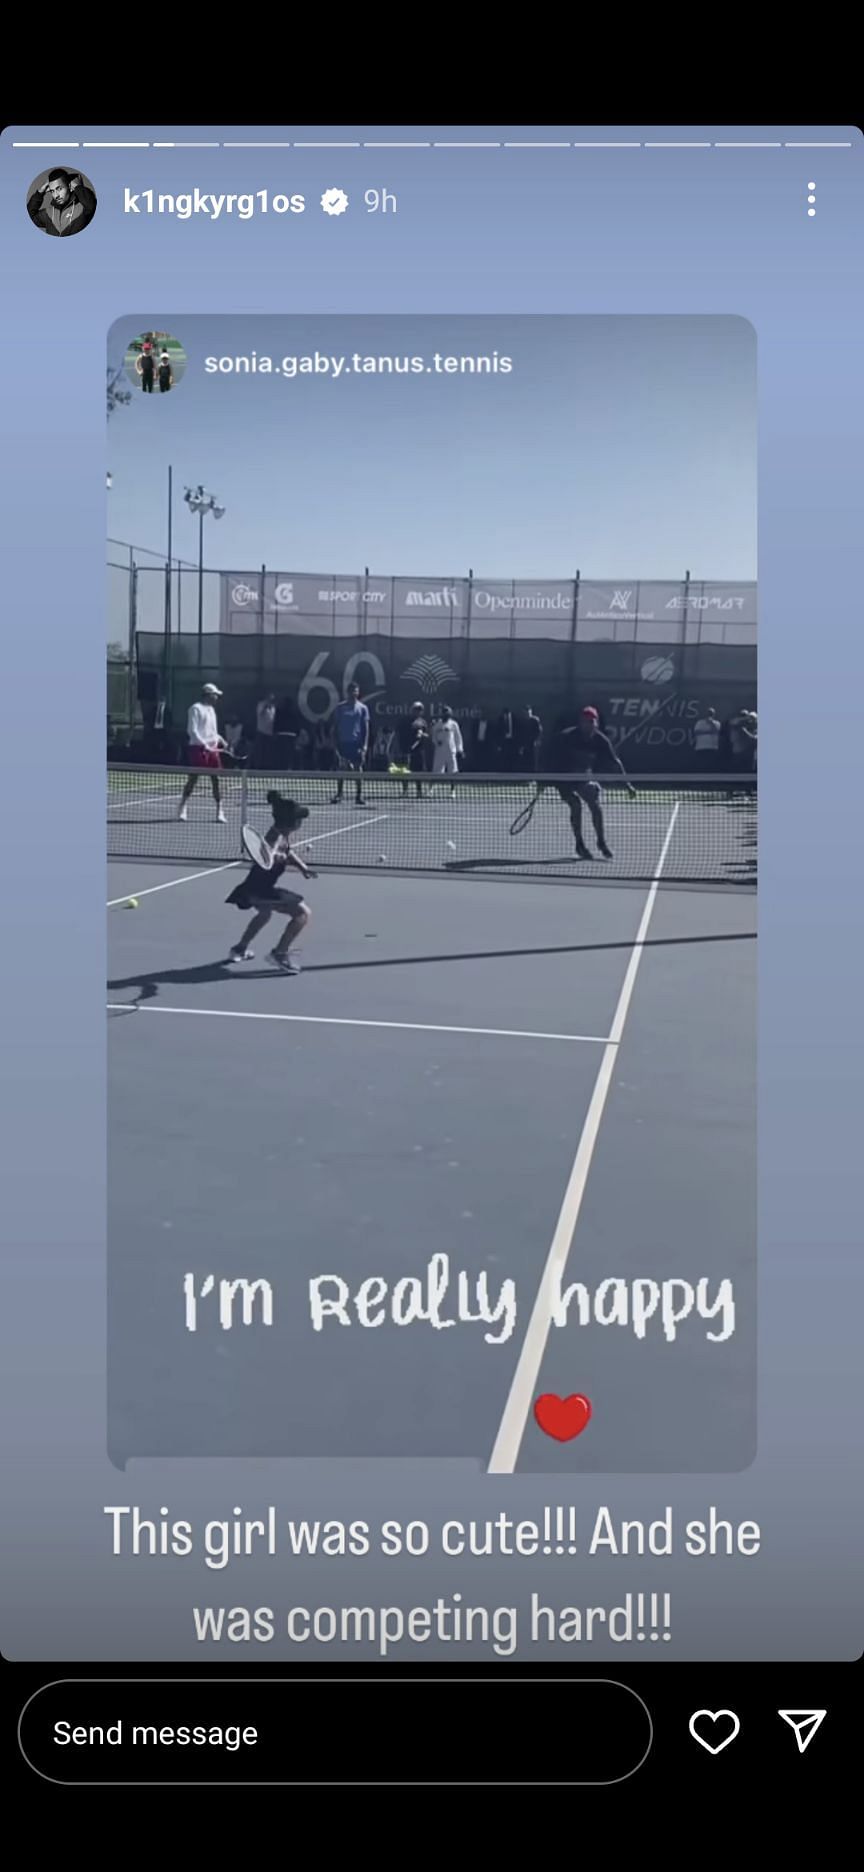 Kyrgios playing tennis with a young girl